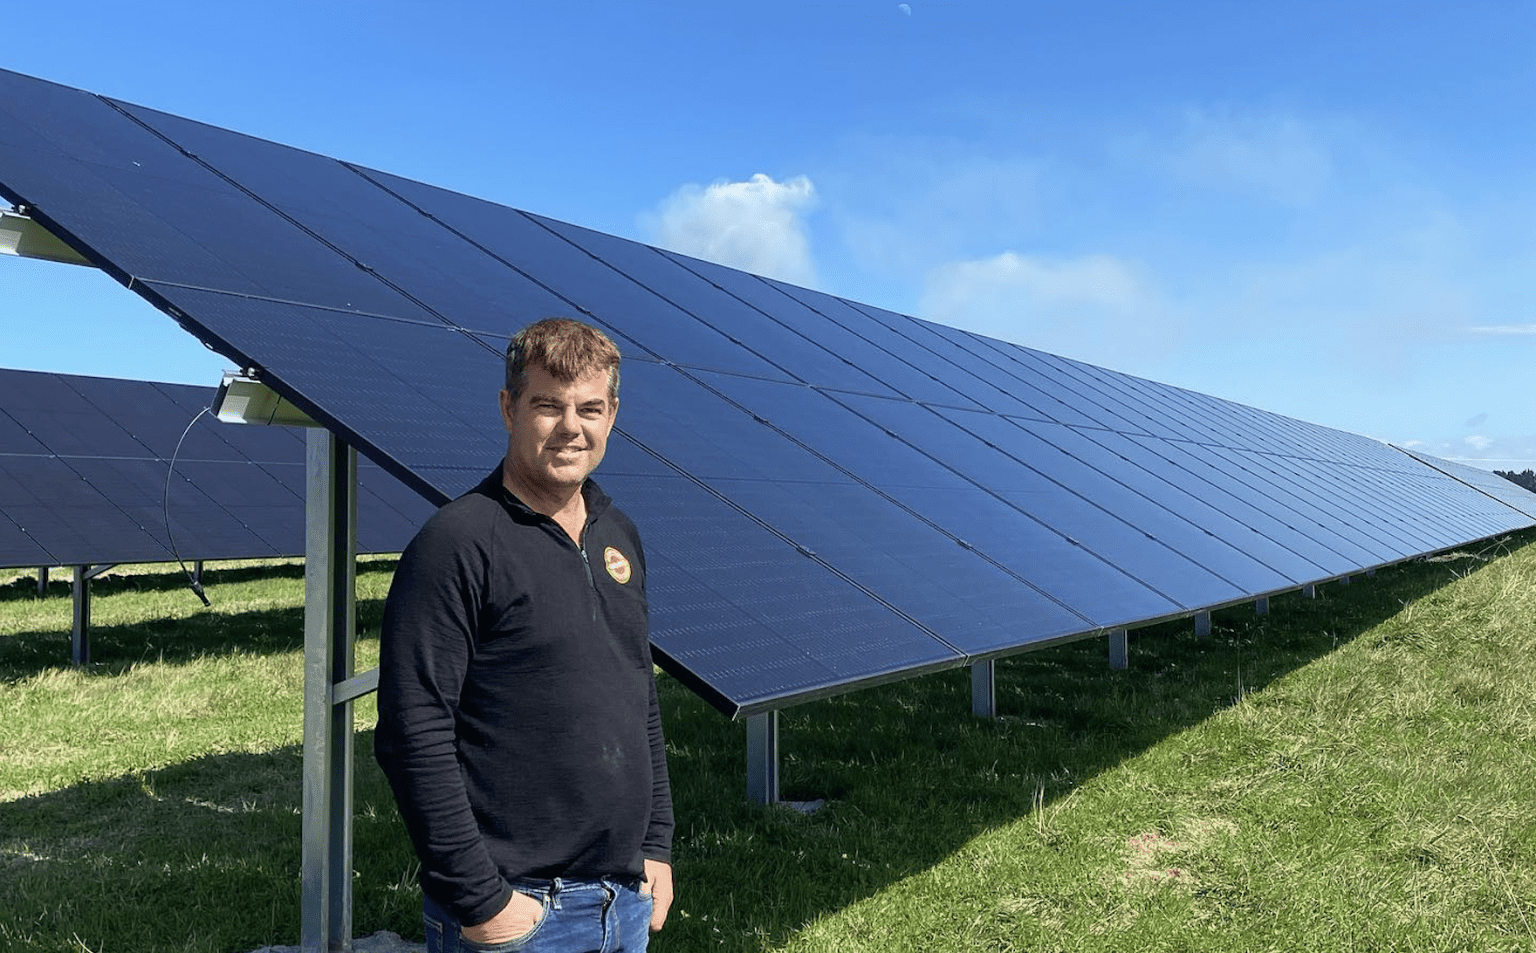 Oakley Potatoes announces one of the South Islands Largest Solar Panel installations